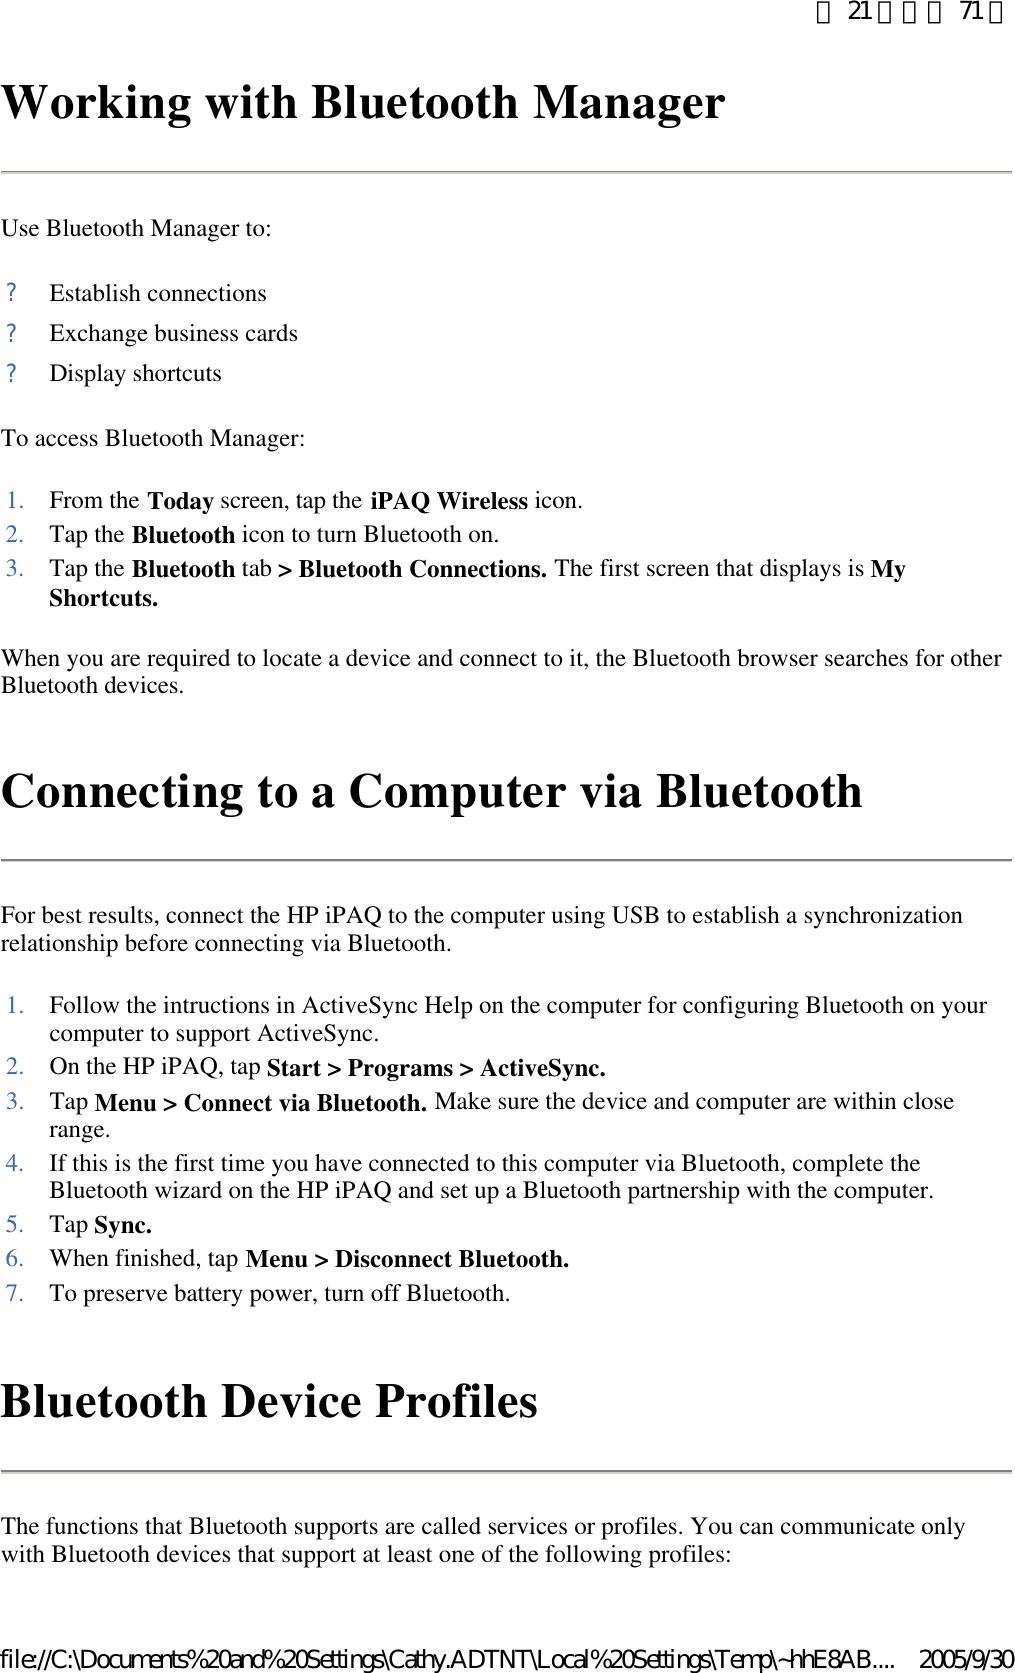 Working with Bluetooth Manager Use Bluetooth Manager to: To access Bluetooth Manager: When you are required to locate a device and connect to it, the Bluetooth browser searches for other Bluetooth devices. Connecting to a Computer via Bluetooth For best results, connect the HP iPAQ to the computer using USB to establish a synchronization relationship before connecting via Bluetooth.  Bluetooth Device Profiles The functions that Bluetooth supports are called services or profiles. You can communicate only with Bluetooth devices that support at least one of the following profiles:  ?Establish connections?Exchange business cards?Display shortcuts1. From the Today screen, tap the iPAQ Wireless icon. 2. Tap the Bluetooth icon to turn Bluetooth on. 3. Tap the Bluetooth tab &gt; Bluetooth Connections. The first screen that displays is My Shortcuts.1. Follow the intructions in ActiveSync Help on the computer for configuring Bluetooth on your computer to support ActiveSync.2. On the HP iPAQ, tap Start &gt; Programs &gt; ActiveSync.3. Tap Menu &gt; Connect via Bluetooth. Make sure the device and computer are within close range. 4. If this is the first time you have connected to this computer via Bluetooth, complete the Bluetooth wizard on the HP iPAQ and set up a Bluetooth partnership with the computer. 5. Tap Sync.6. When finished, tap Menu &gt; Disconnect Bluetooth.7. To preserve battery power, turn off Bluetooth. 第 21 頁，共 71 頁2005/9/30file://C:\Documents%20and%20Settings\Cathy.ADTNT\Local%20Settings\Temp\~hhE8AB....